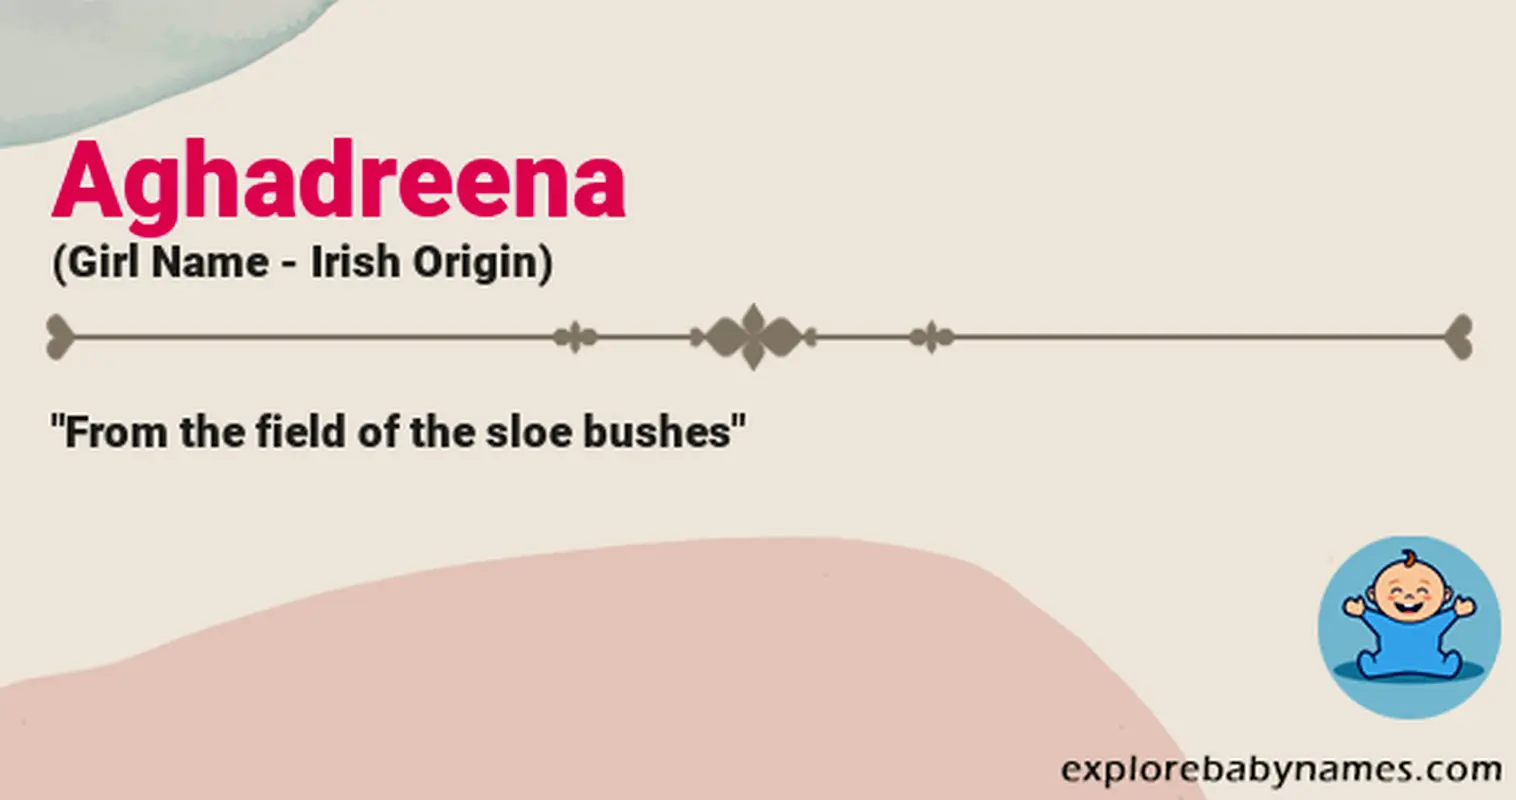 Meaning of Aghadreena